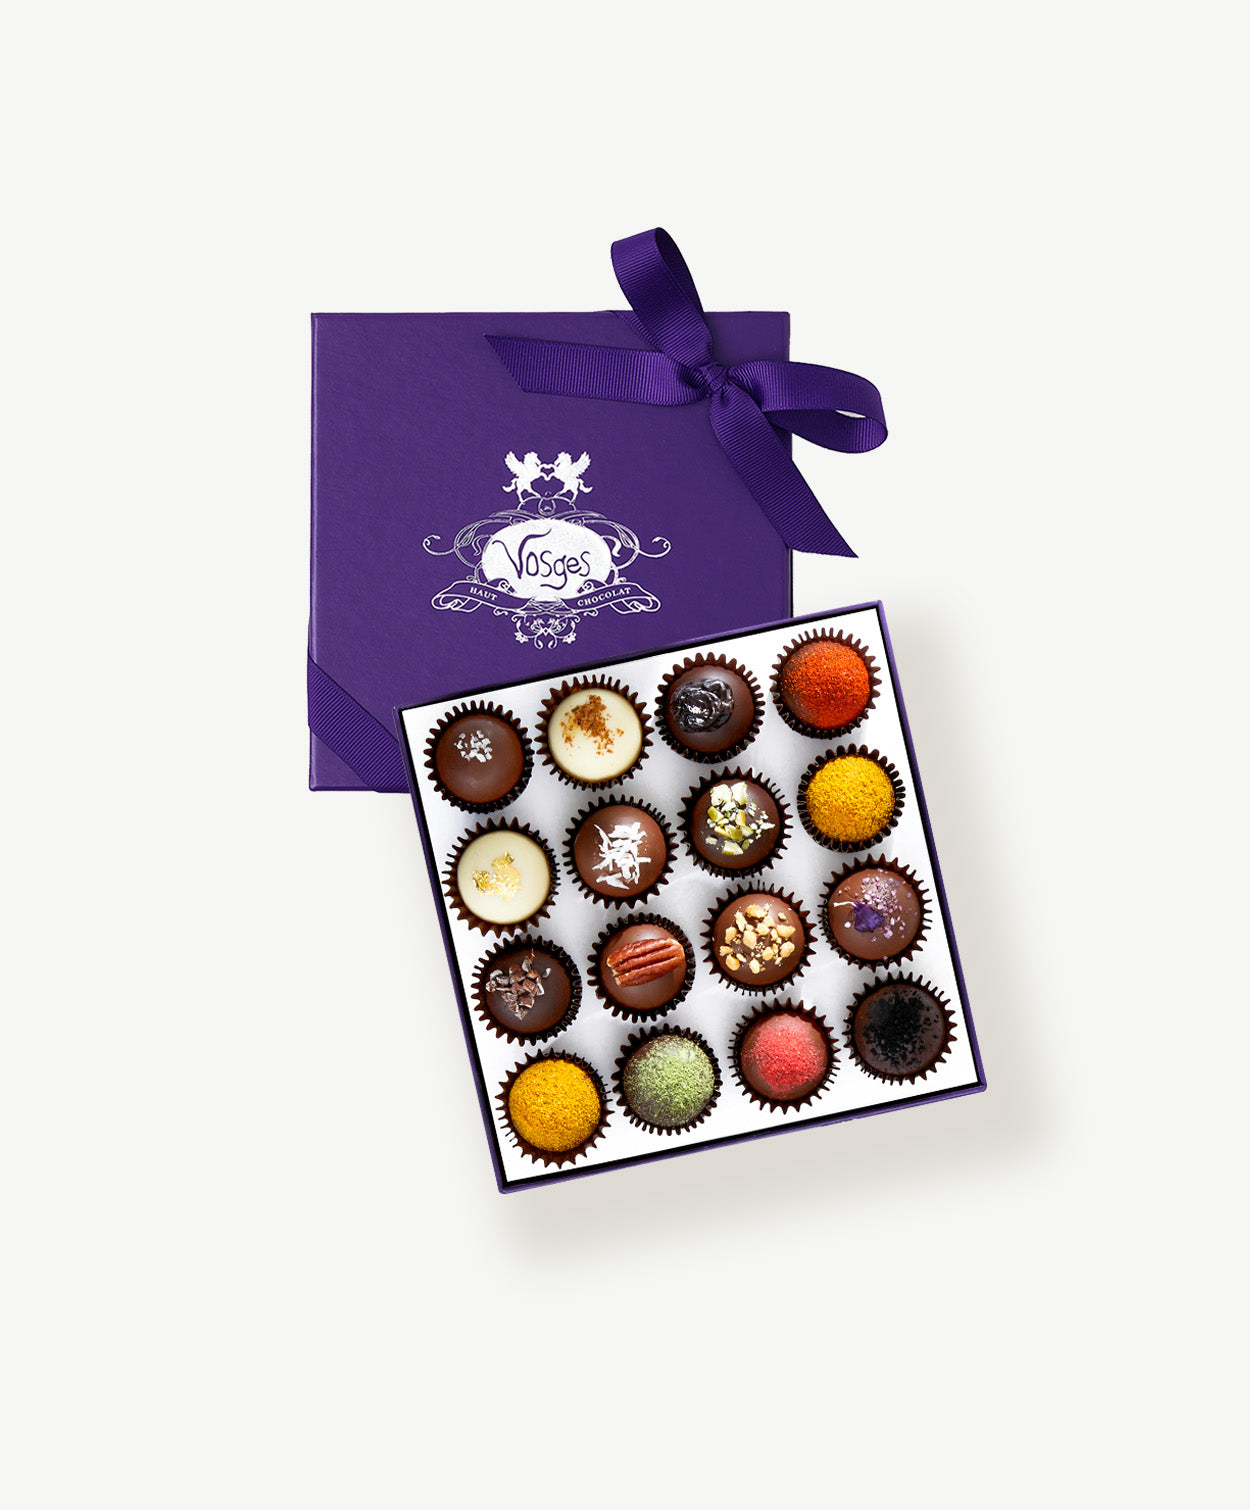 Open box of chocolate tied with a purple ribbon.  Vosges Haut-Chocolat Exotic Truffles 16 pieces Truffle Collection on white background.